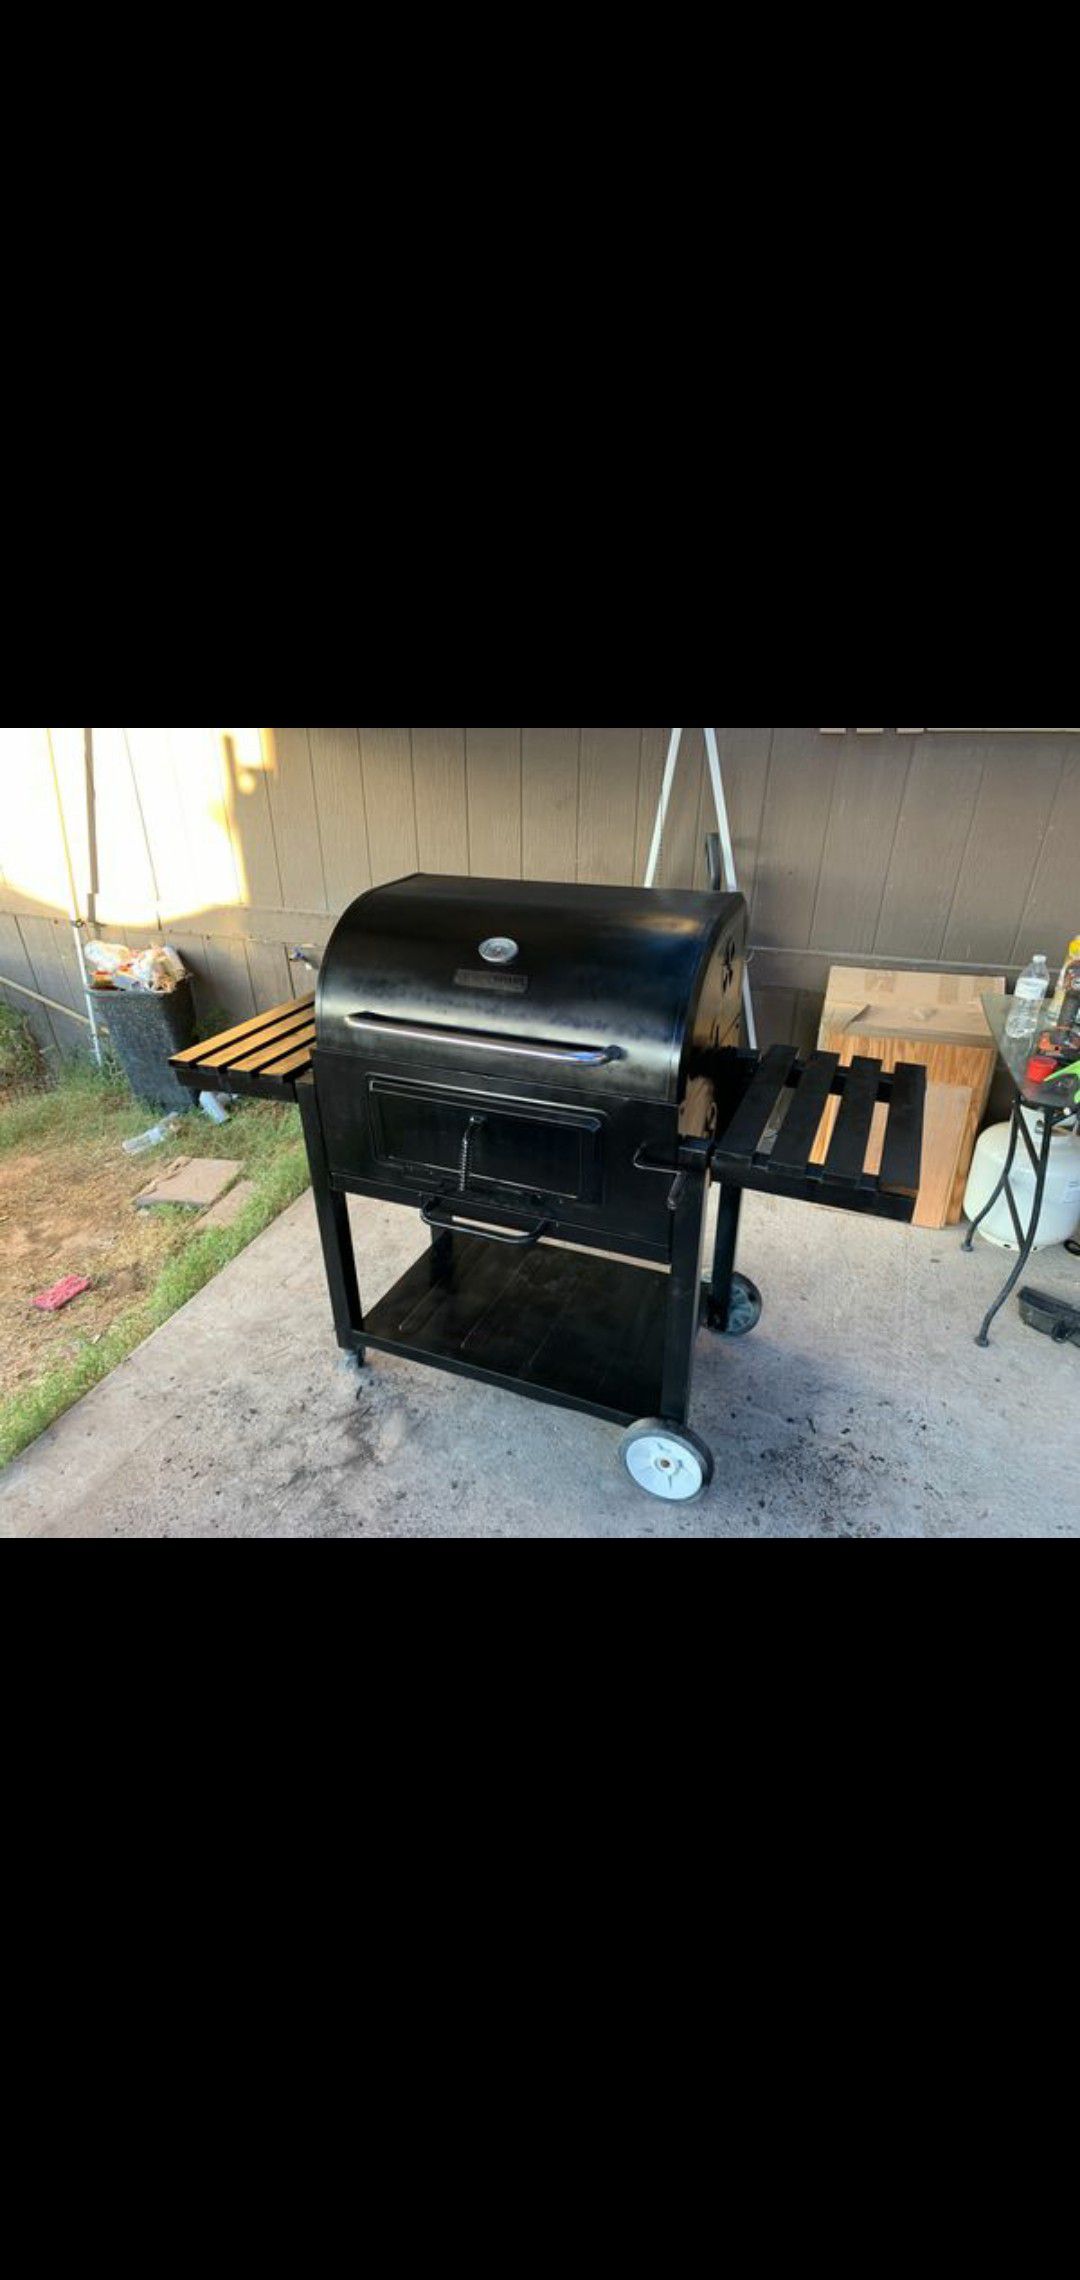 Bbq grill charcoal for sale